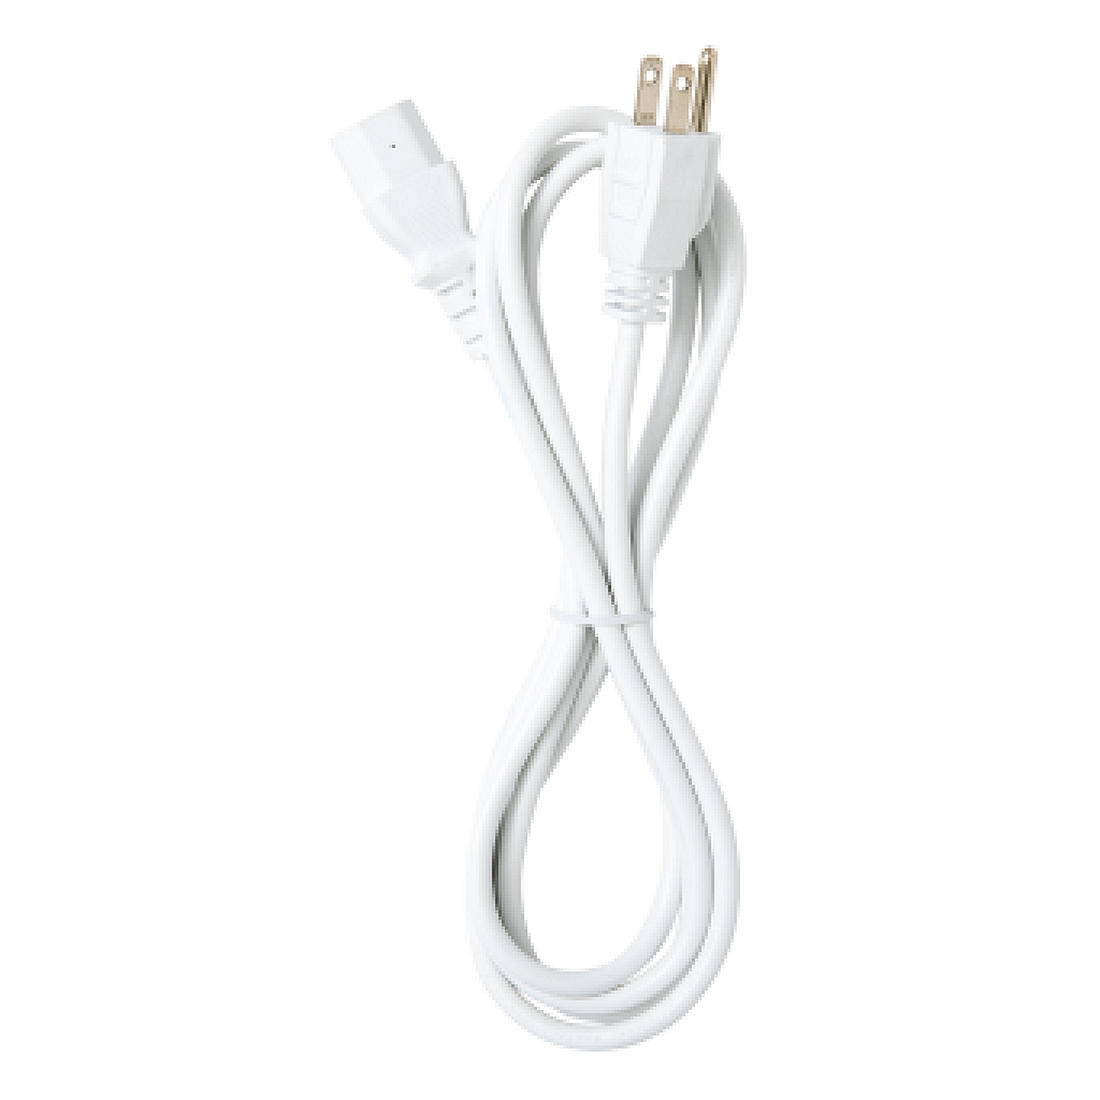 CRICUT GYPSY OEM Replacement Cable Lot: Power Cord - extra long USB cord  $22.99 - PicClick